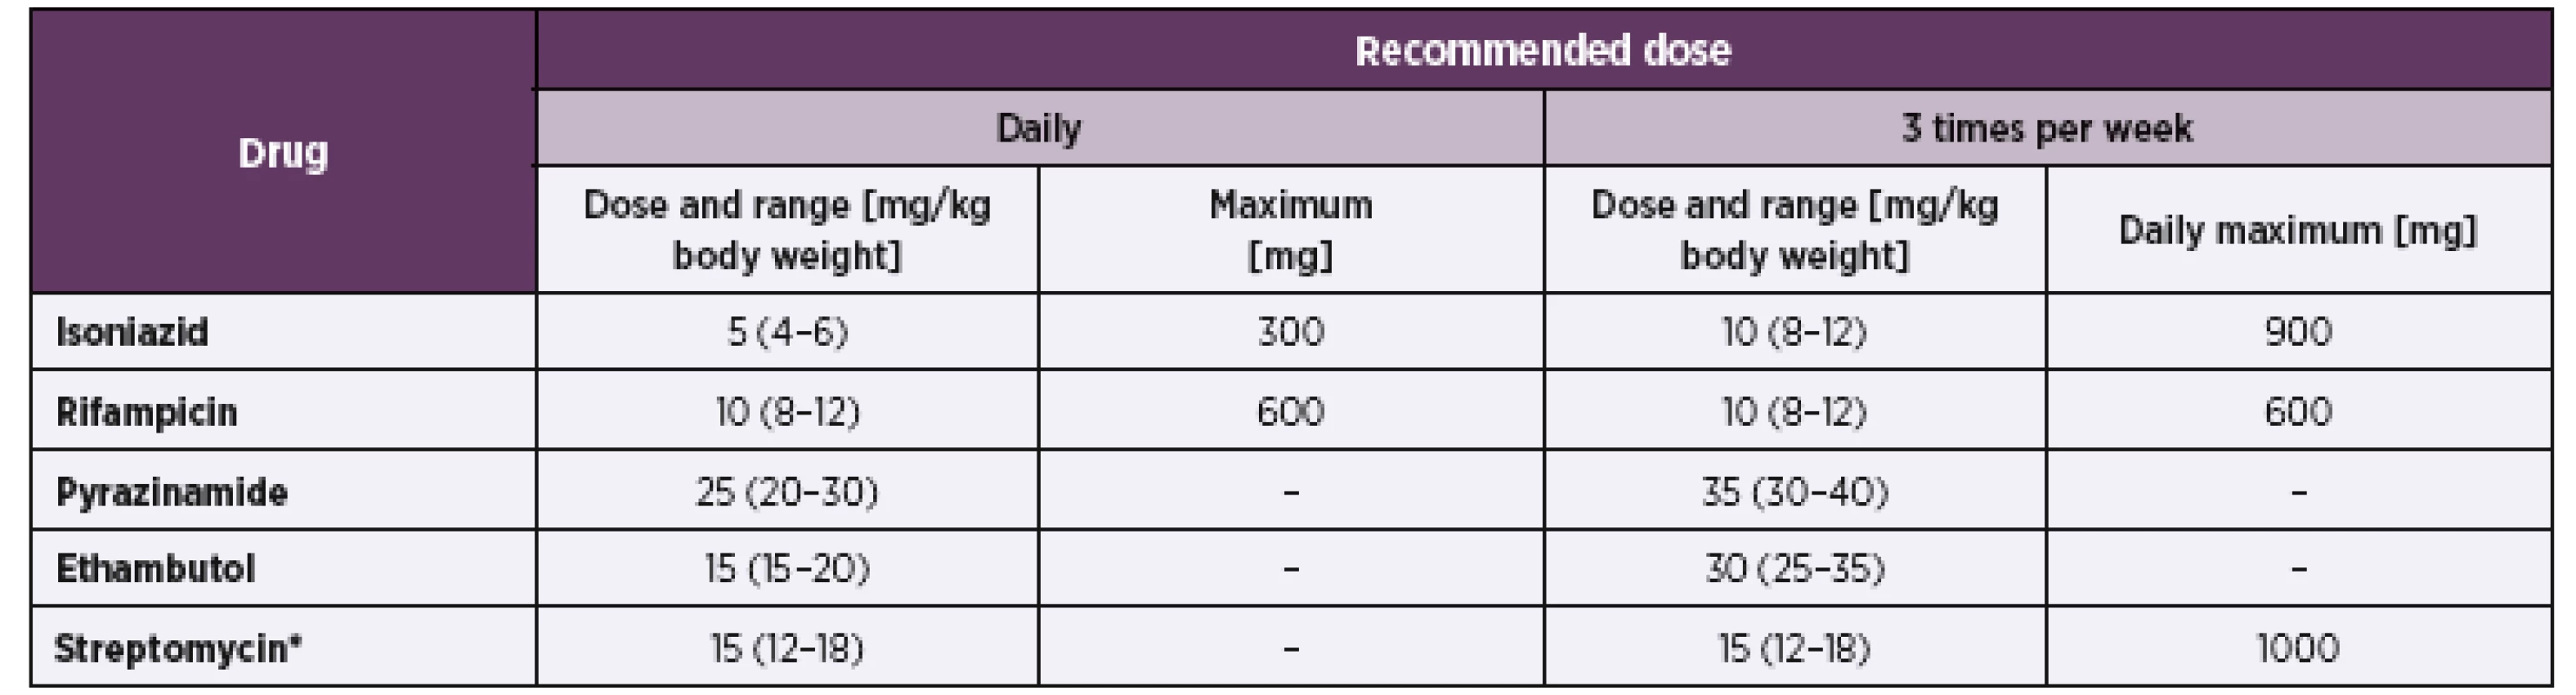 Recommended doses of first-line anti-tuberculosis drugs in adults